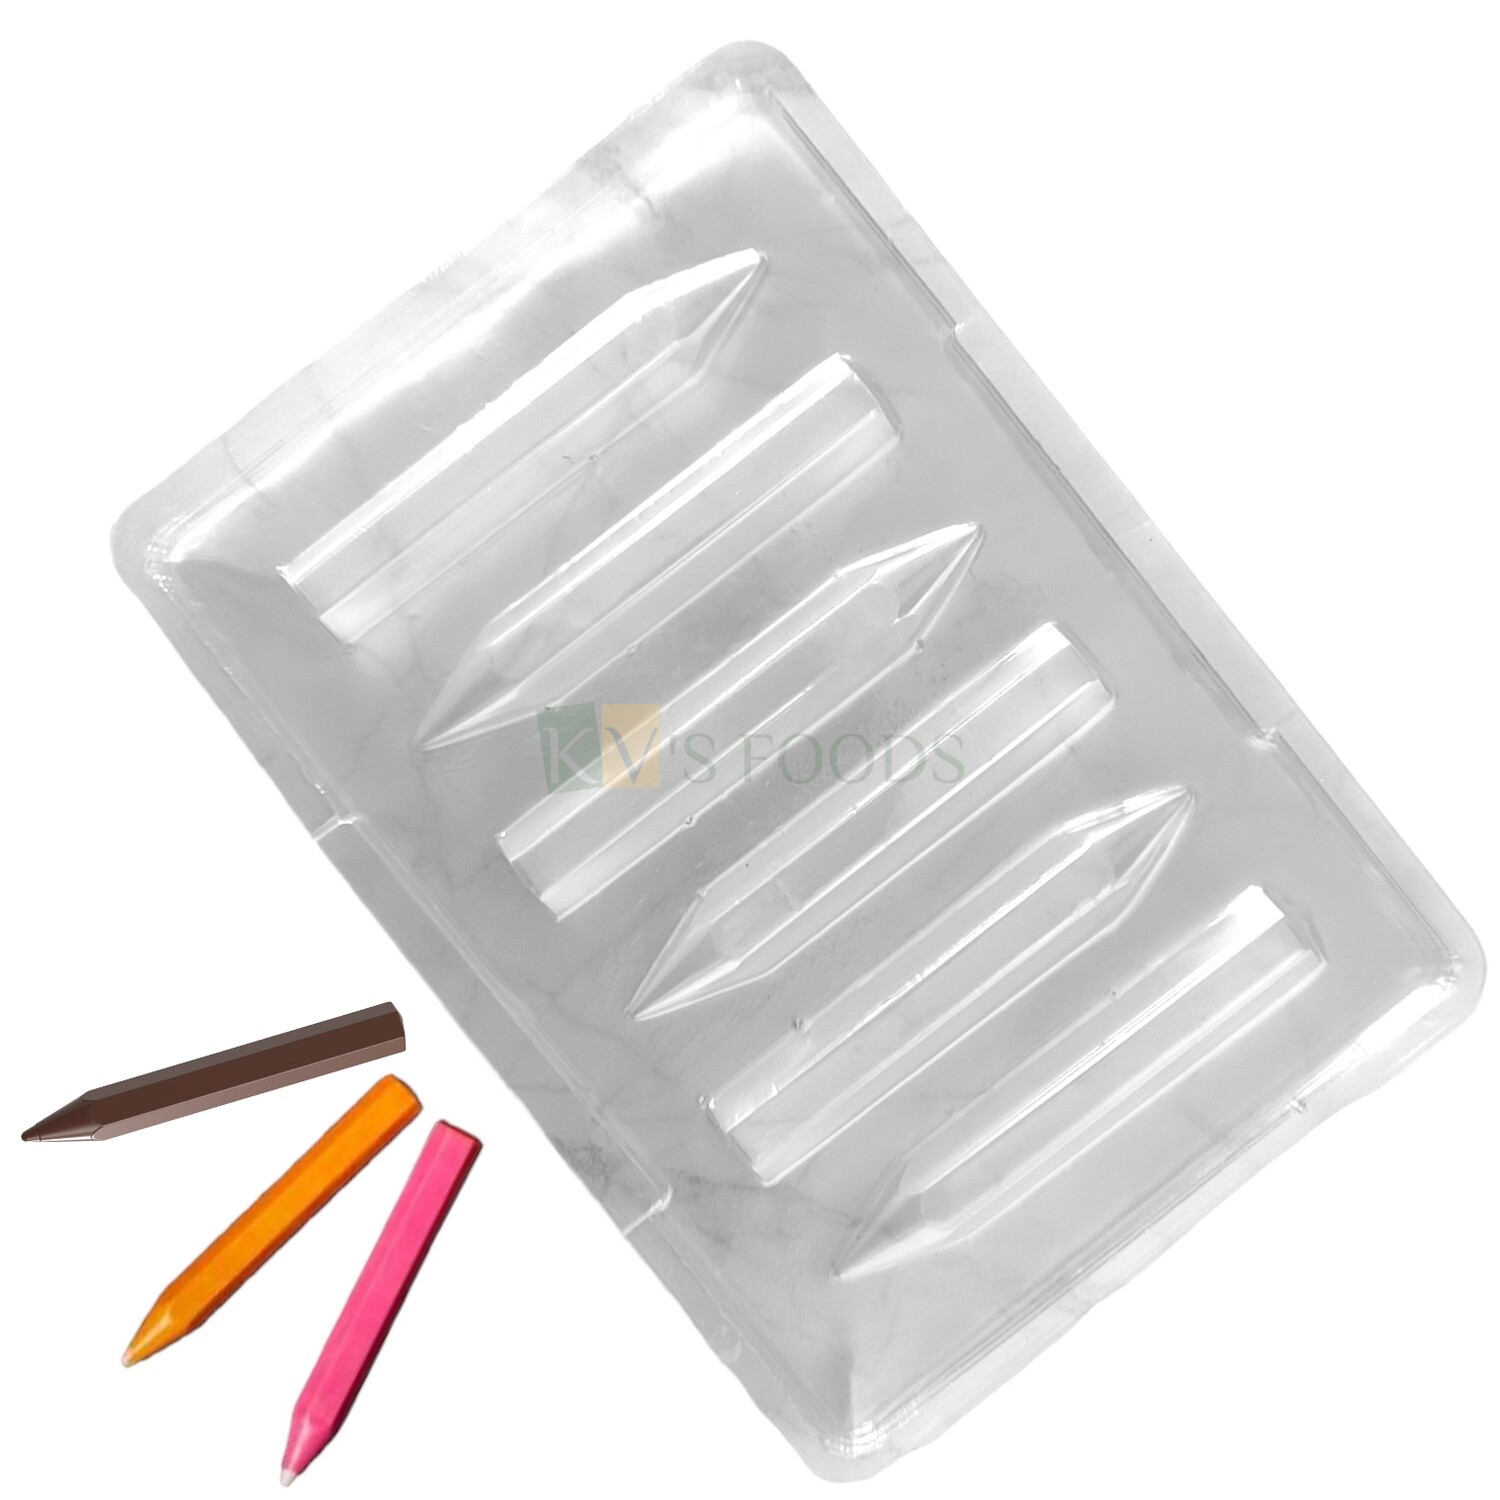 6 Cavity PVC Crayons Pencil Pen for Kids Chocolate Mould Chocolate Making Mould